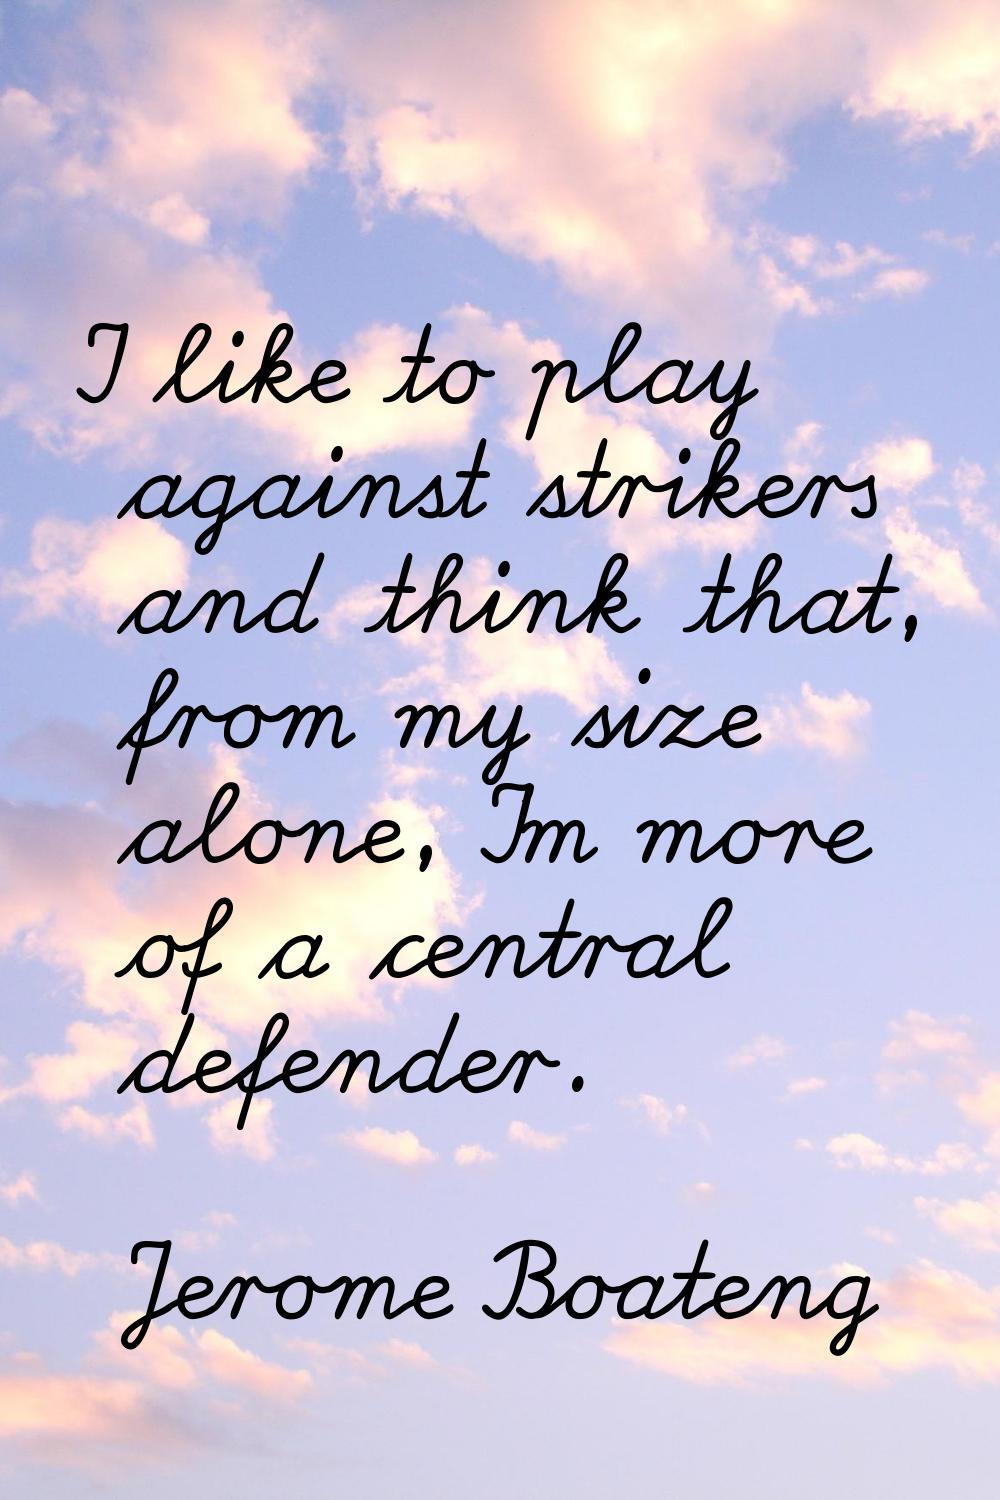 I like to play against strikers and think that, from my size alone, I'm more of a central defender.